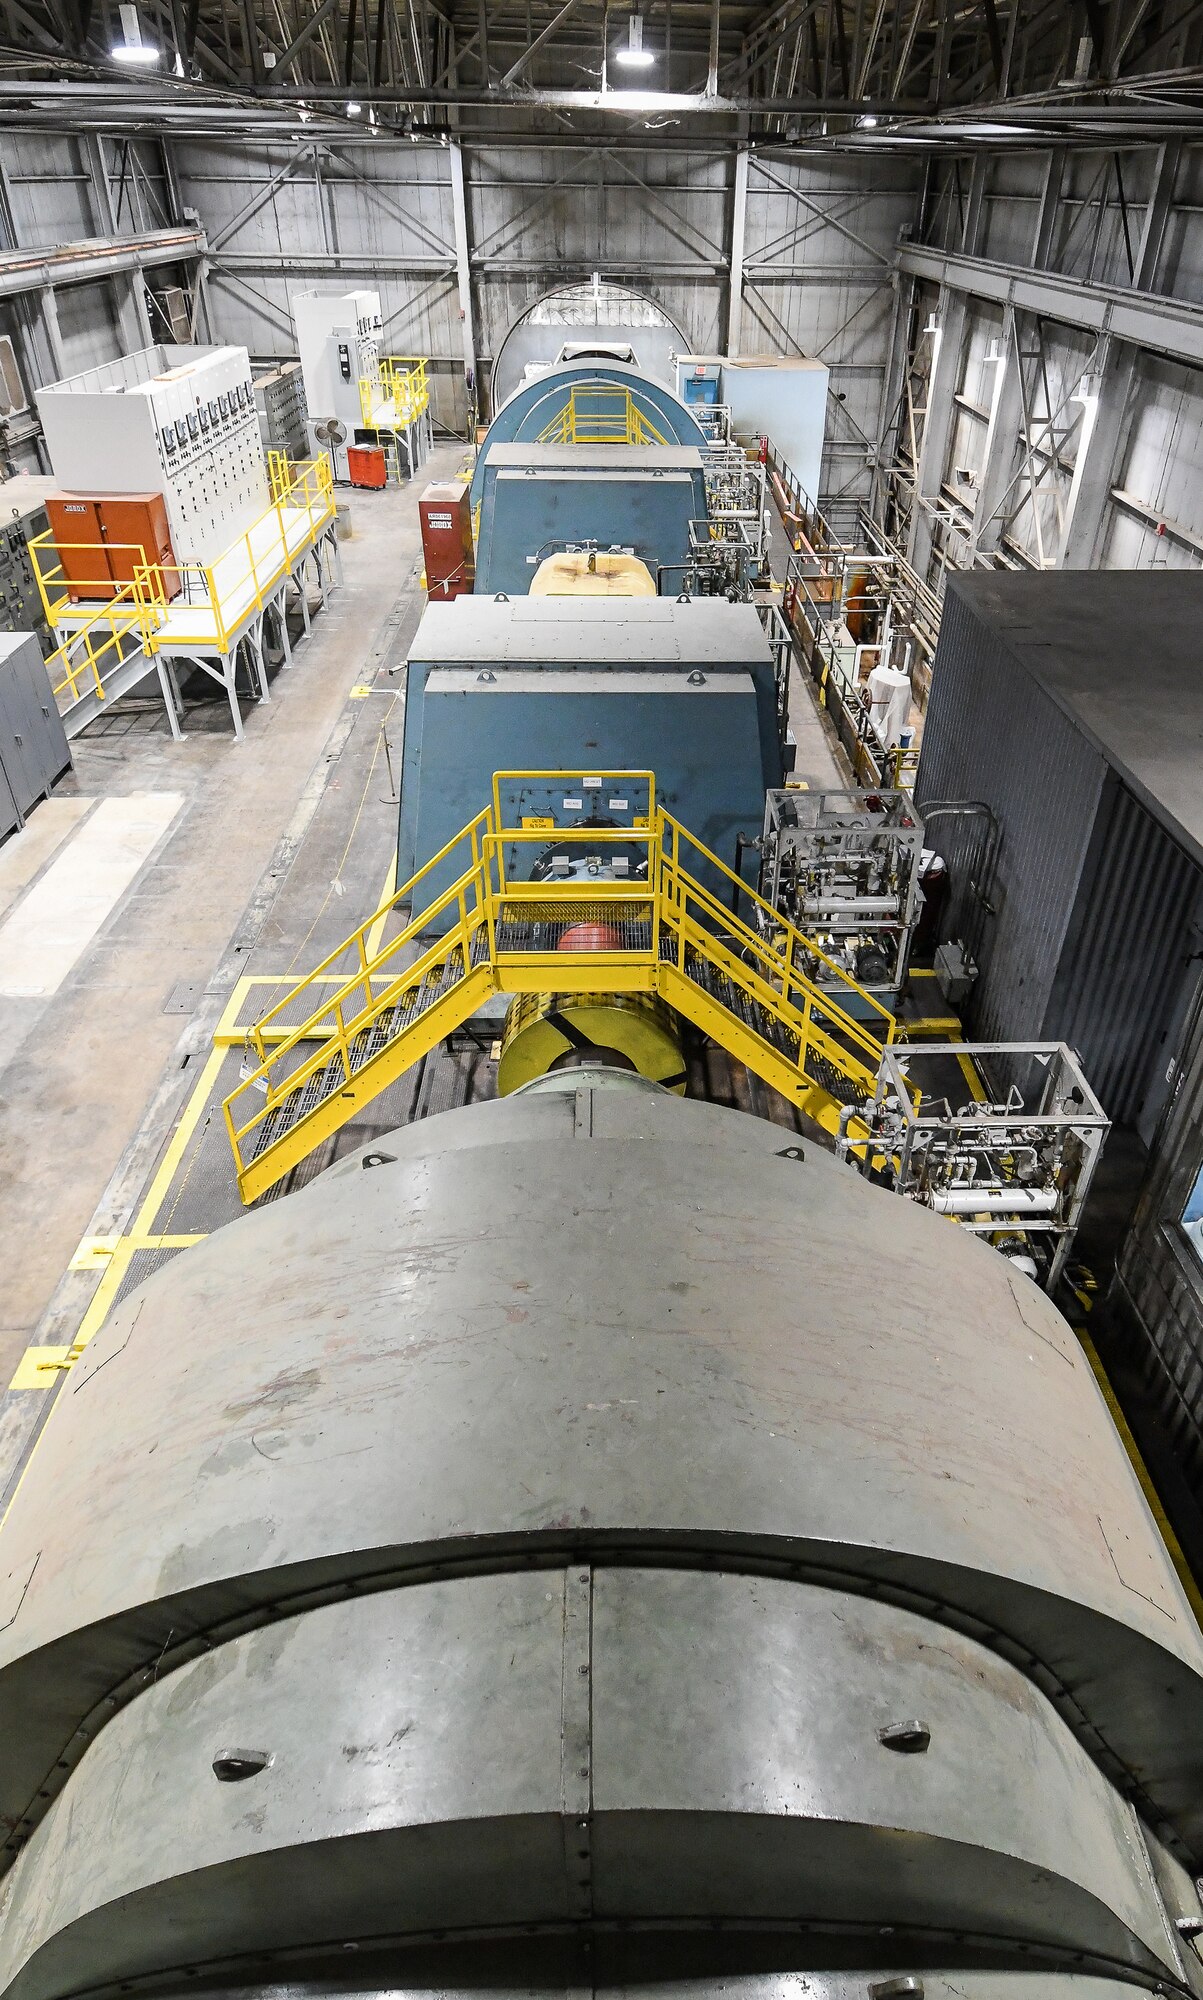 Motors make up the Main Drive of the Arnold Engineering Development Complex Propulsion Wind Tunnel Facility, shown here Feb. 7, 2020, at Arnold Air Force Base, Tenn. (U.S. Air Force photo by Jill Pickett)